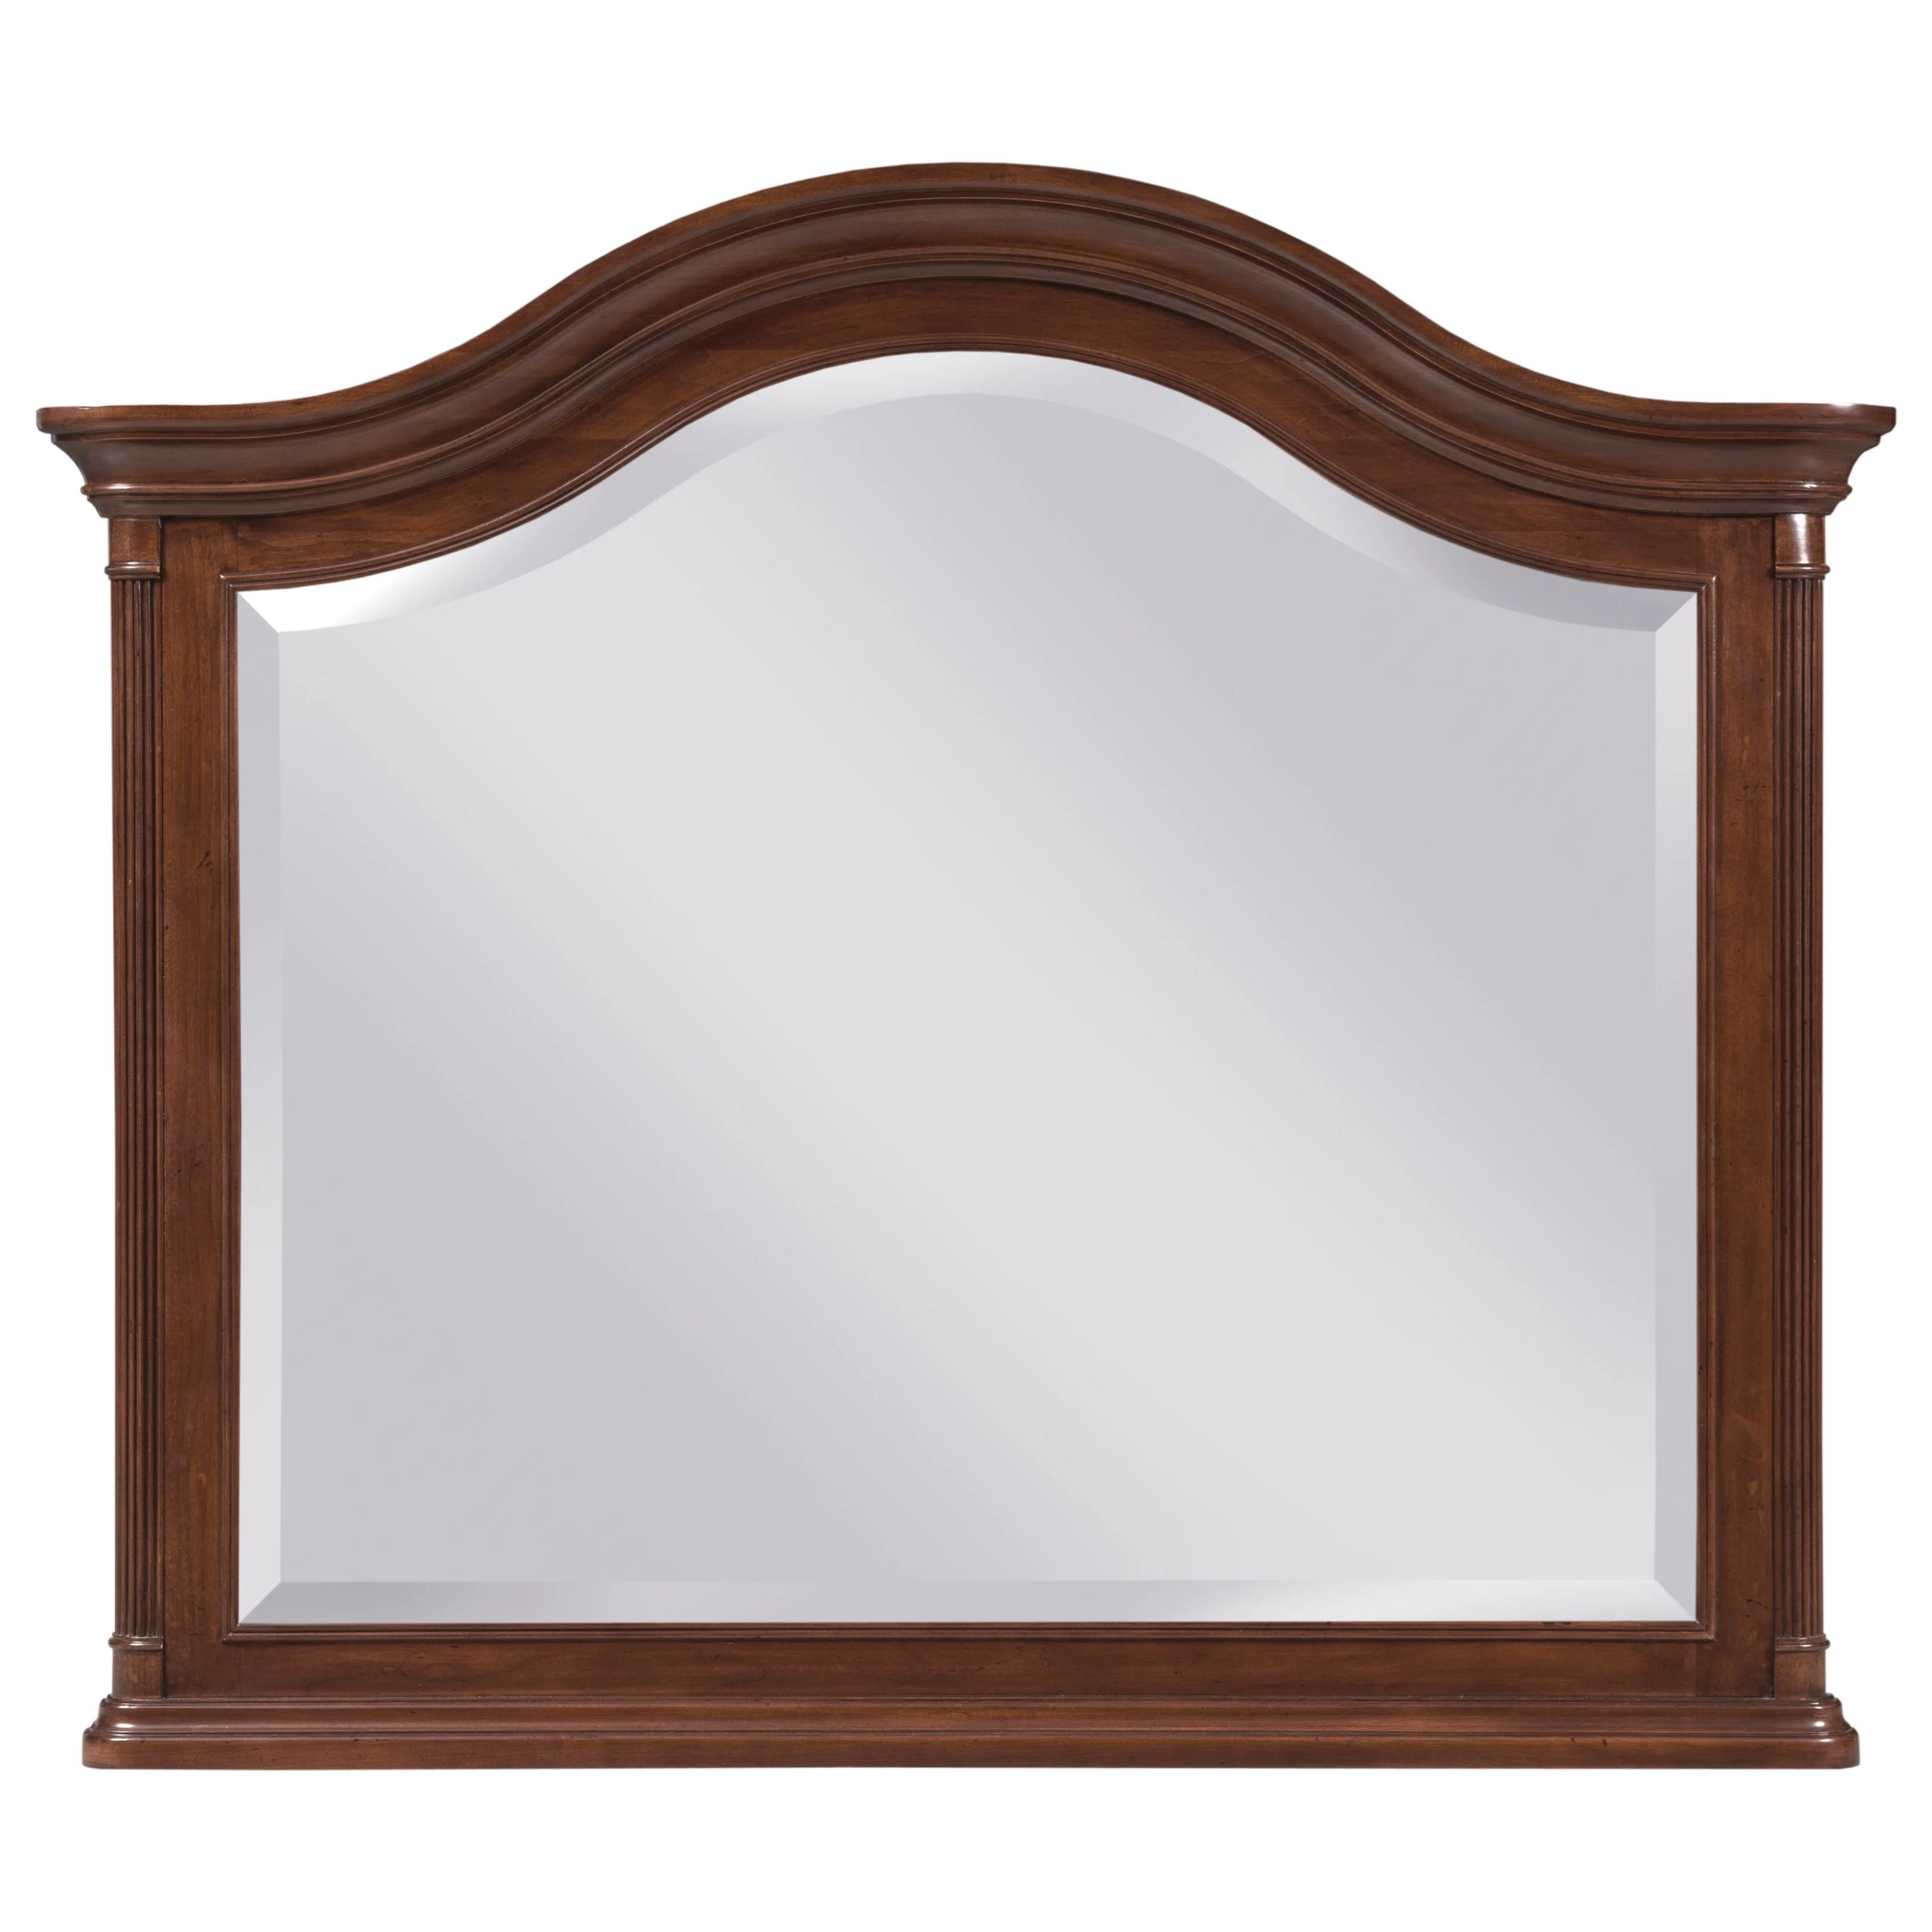 Kincaid Furniture Hadleigh 607 020 Traditional Arched Landscape Mirror Belfort Furniture